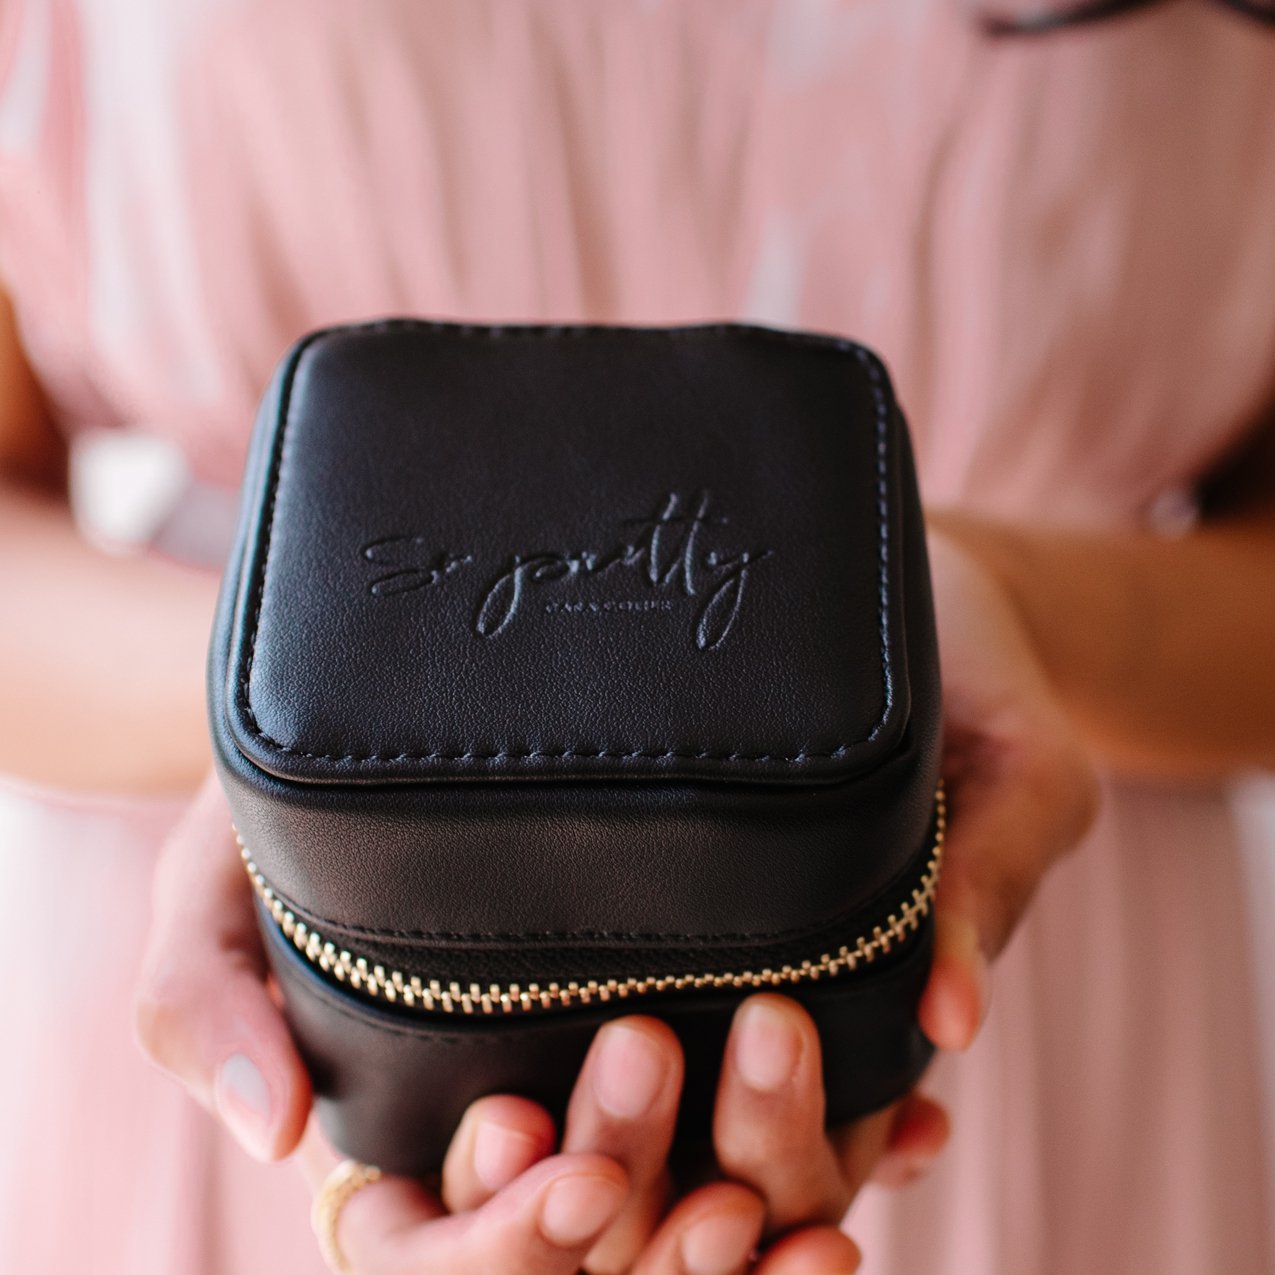 Wanderlust Daily Jewelry Bag - Black - SO PRETTY CARA COTTER